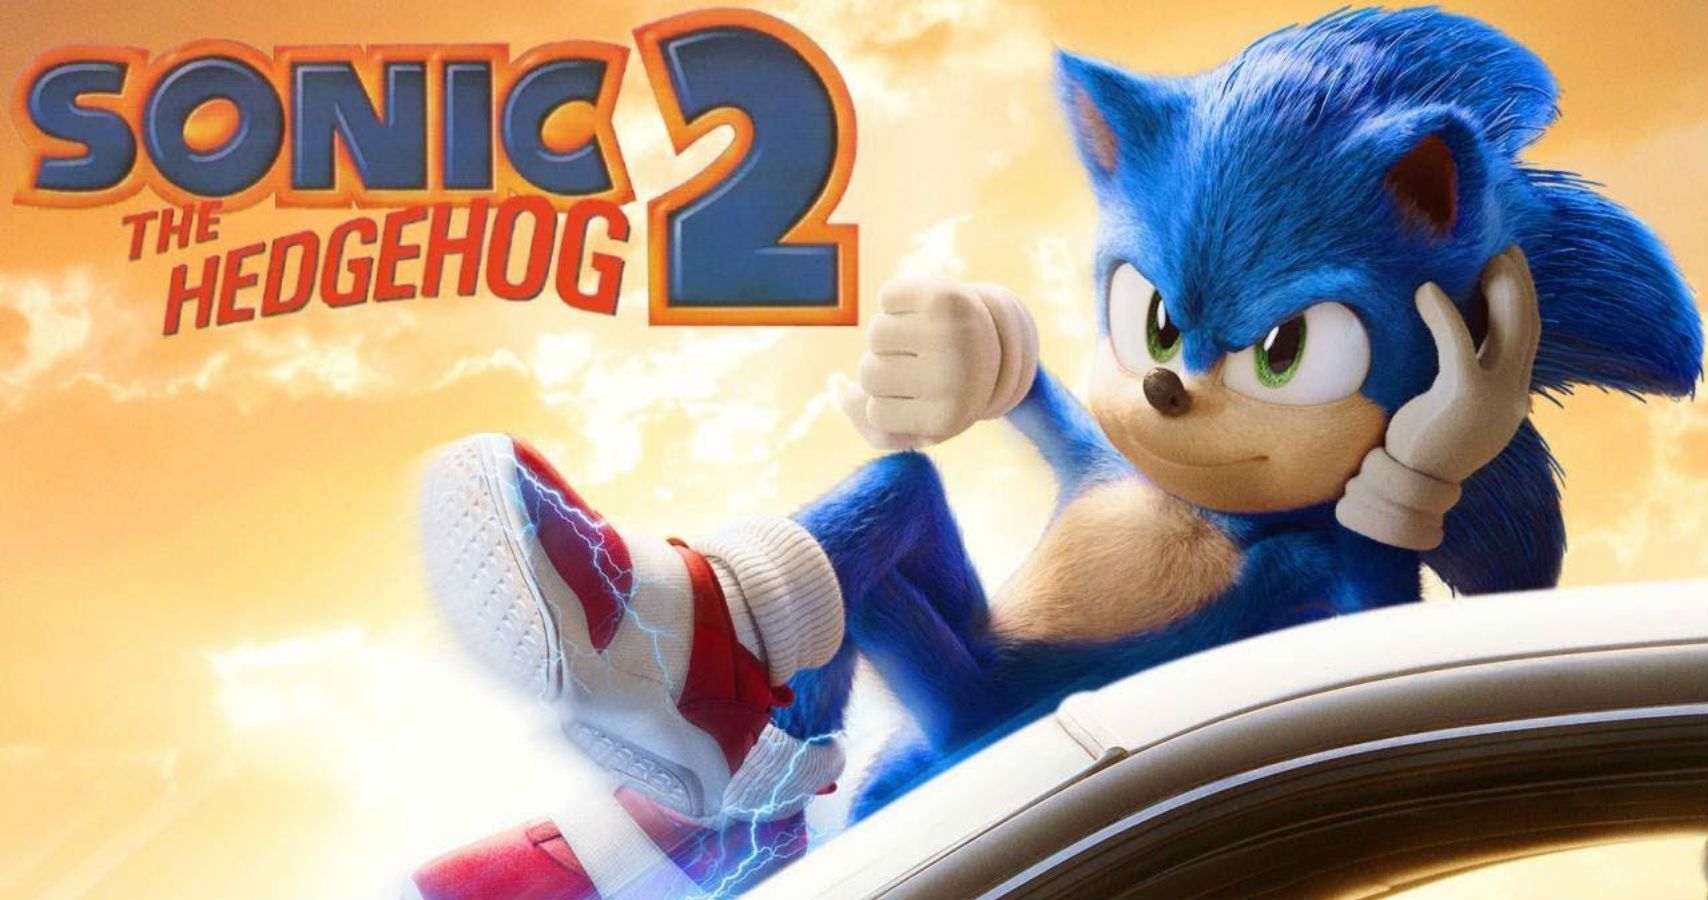 Sonic The Hedgehog 2 Will Speed Into Theaters April 2022